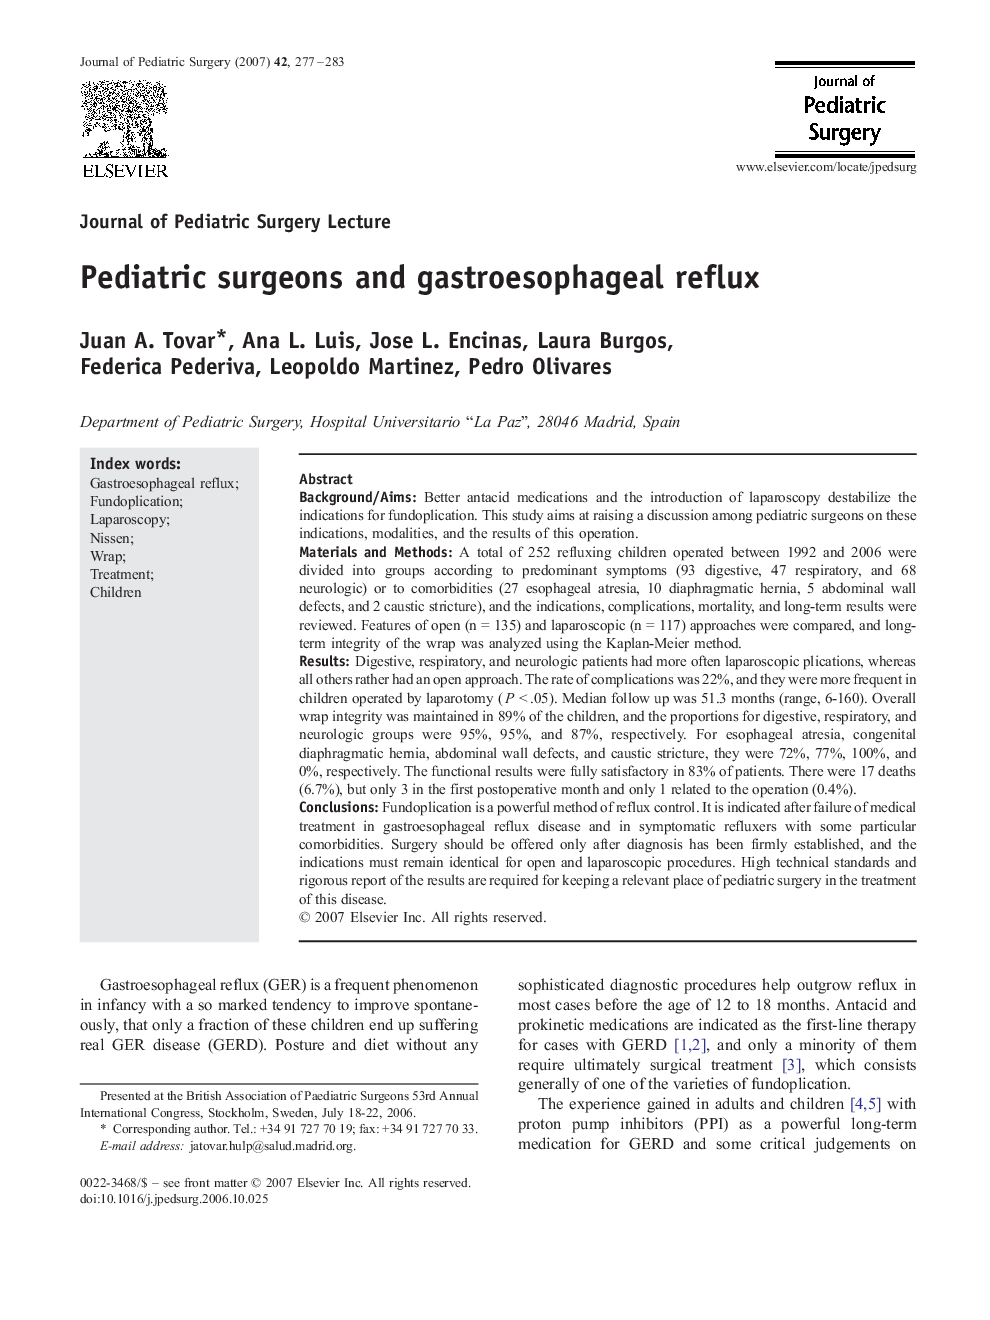 Pediatric surgeons and gastroesophageal reflux 